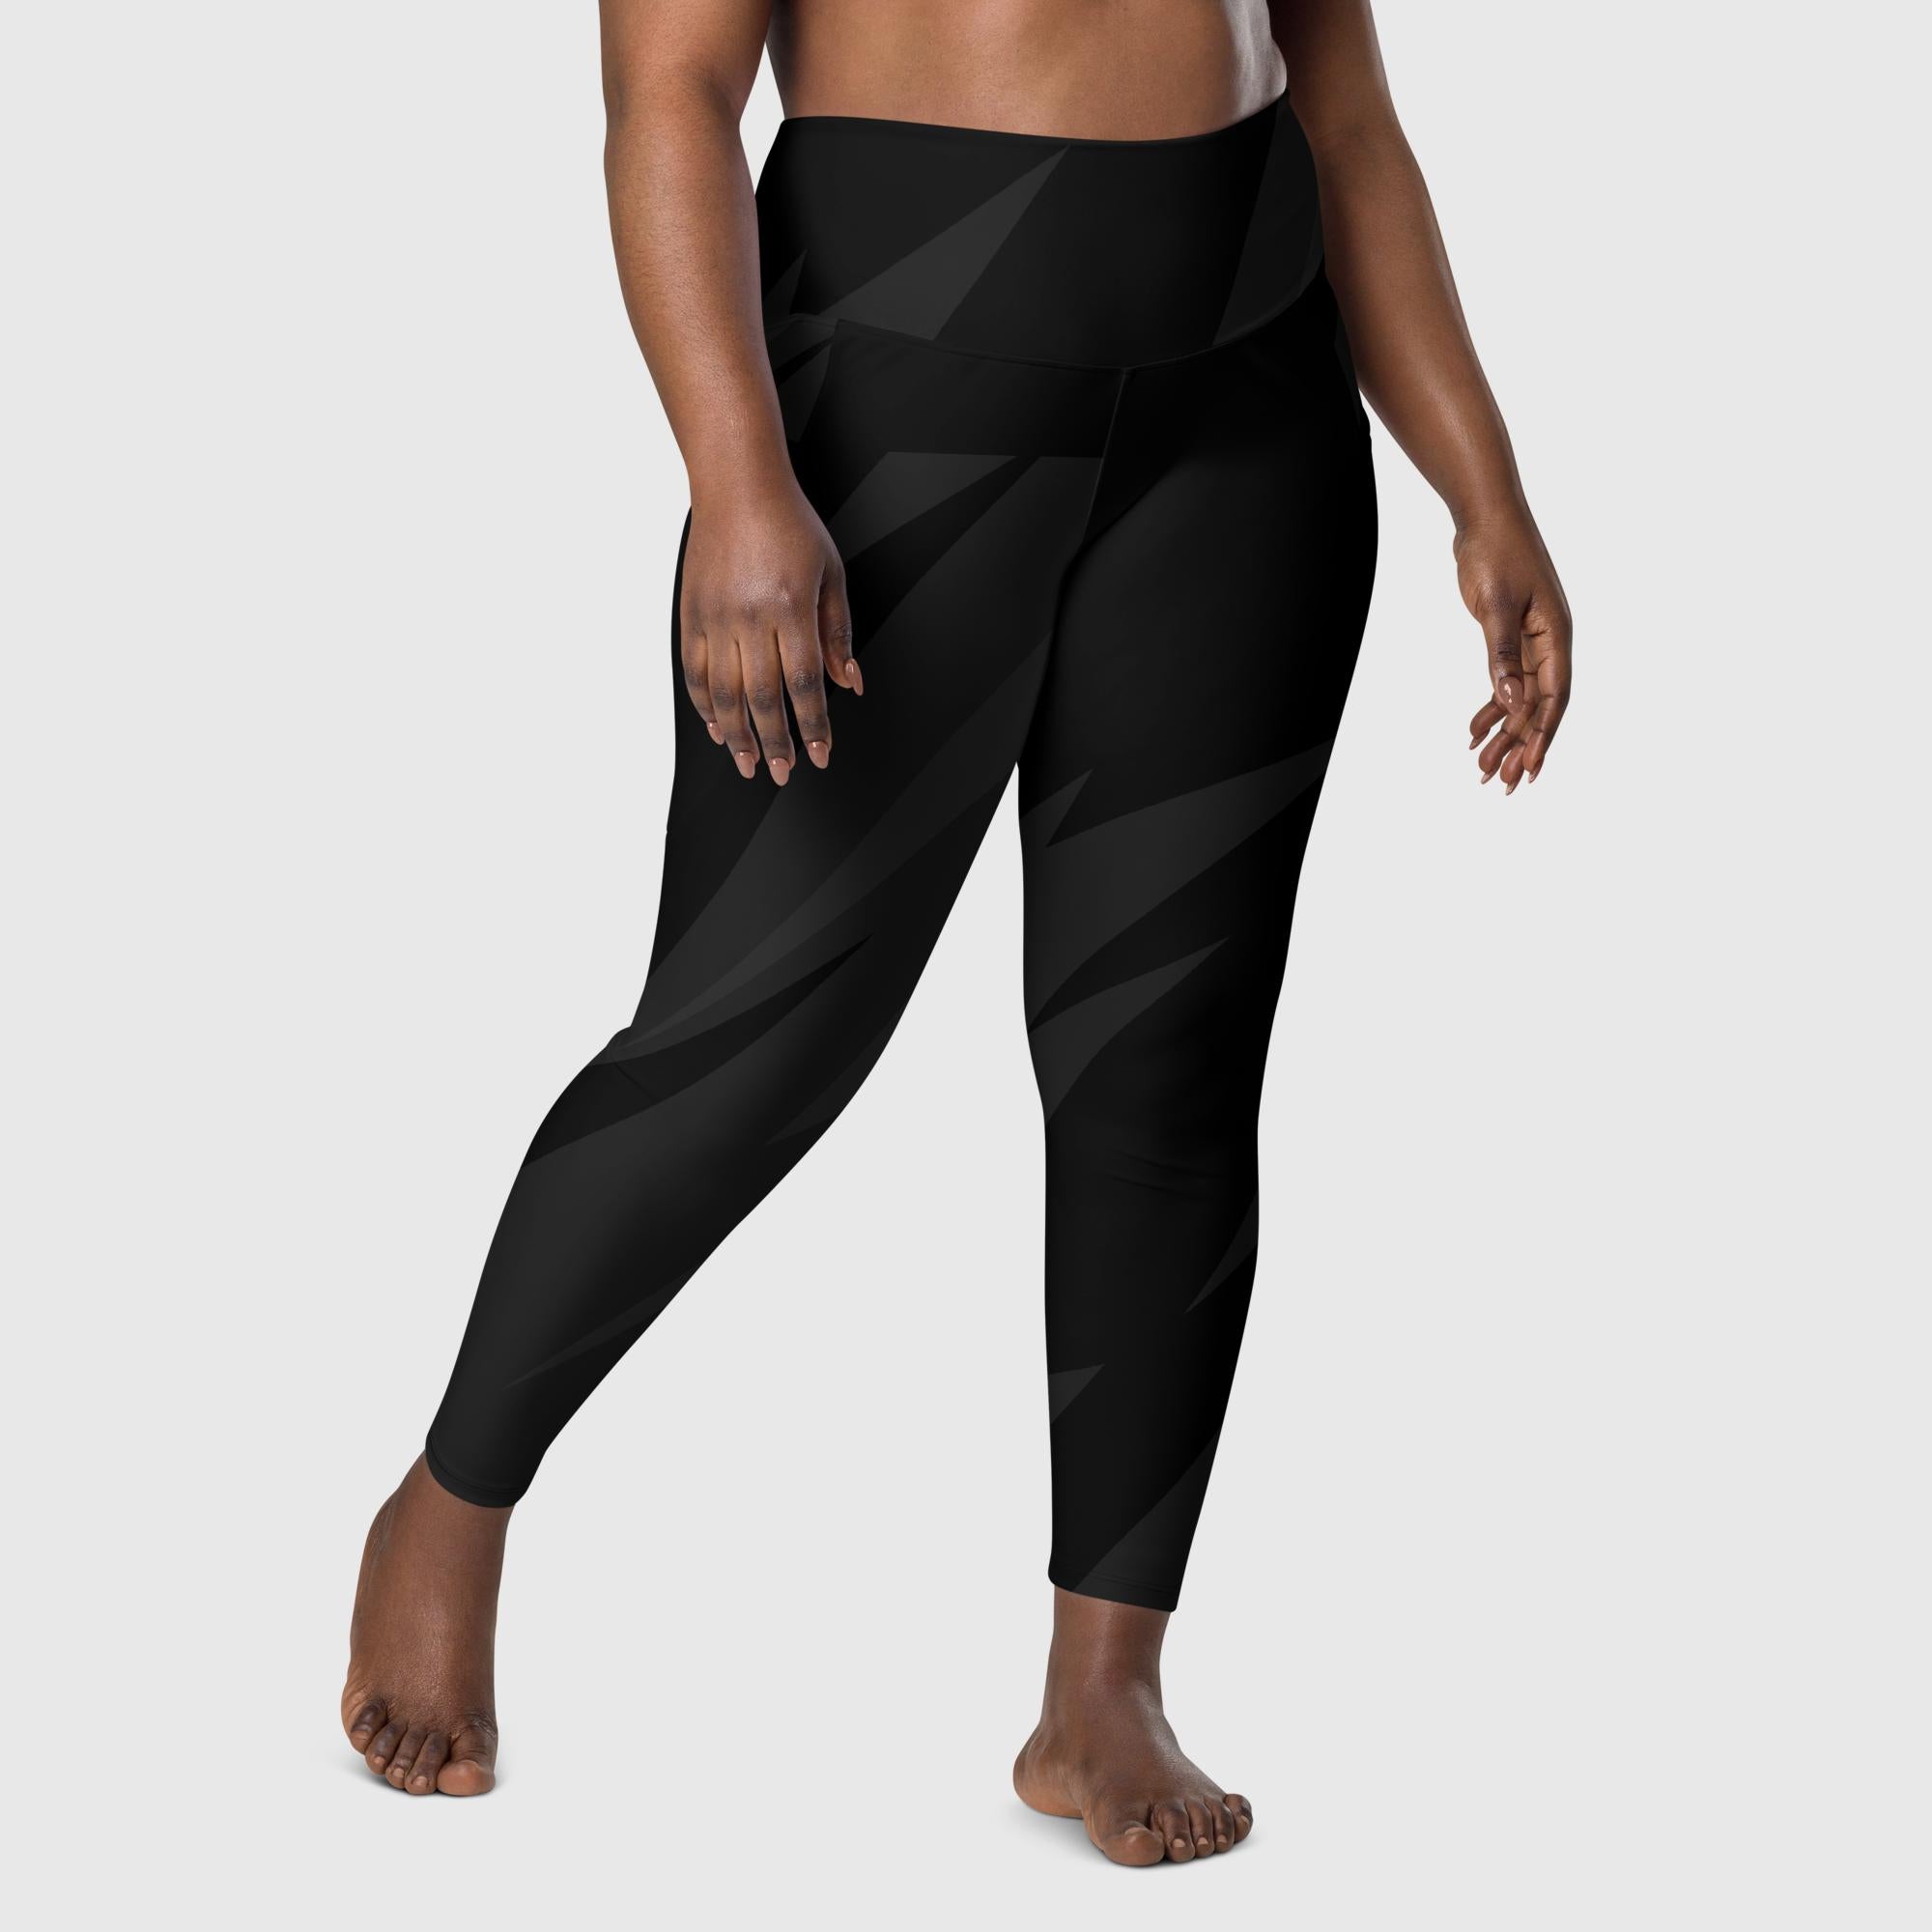 Black Pocket Leggings - Revive Wear     Black Pocket Leggings. Recycled polyester and Semi-Compression fabric. Flattering high waist design. Shop sizes from XL to 6XL with free shipping. 